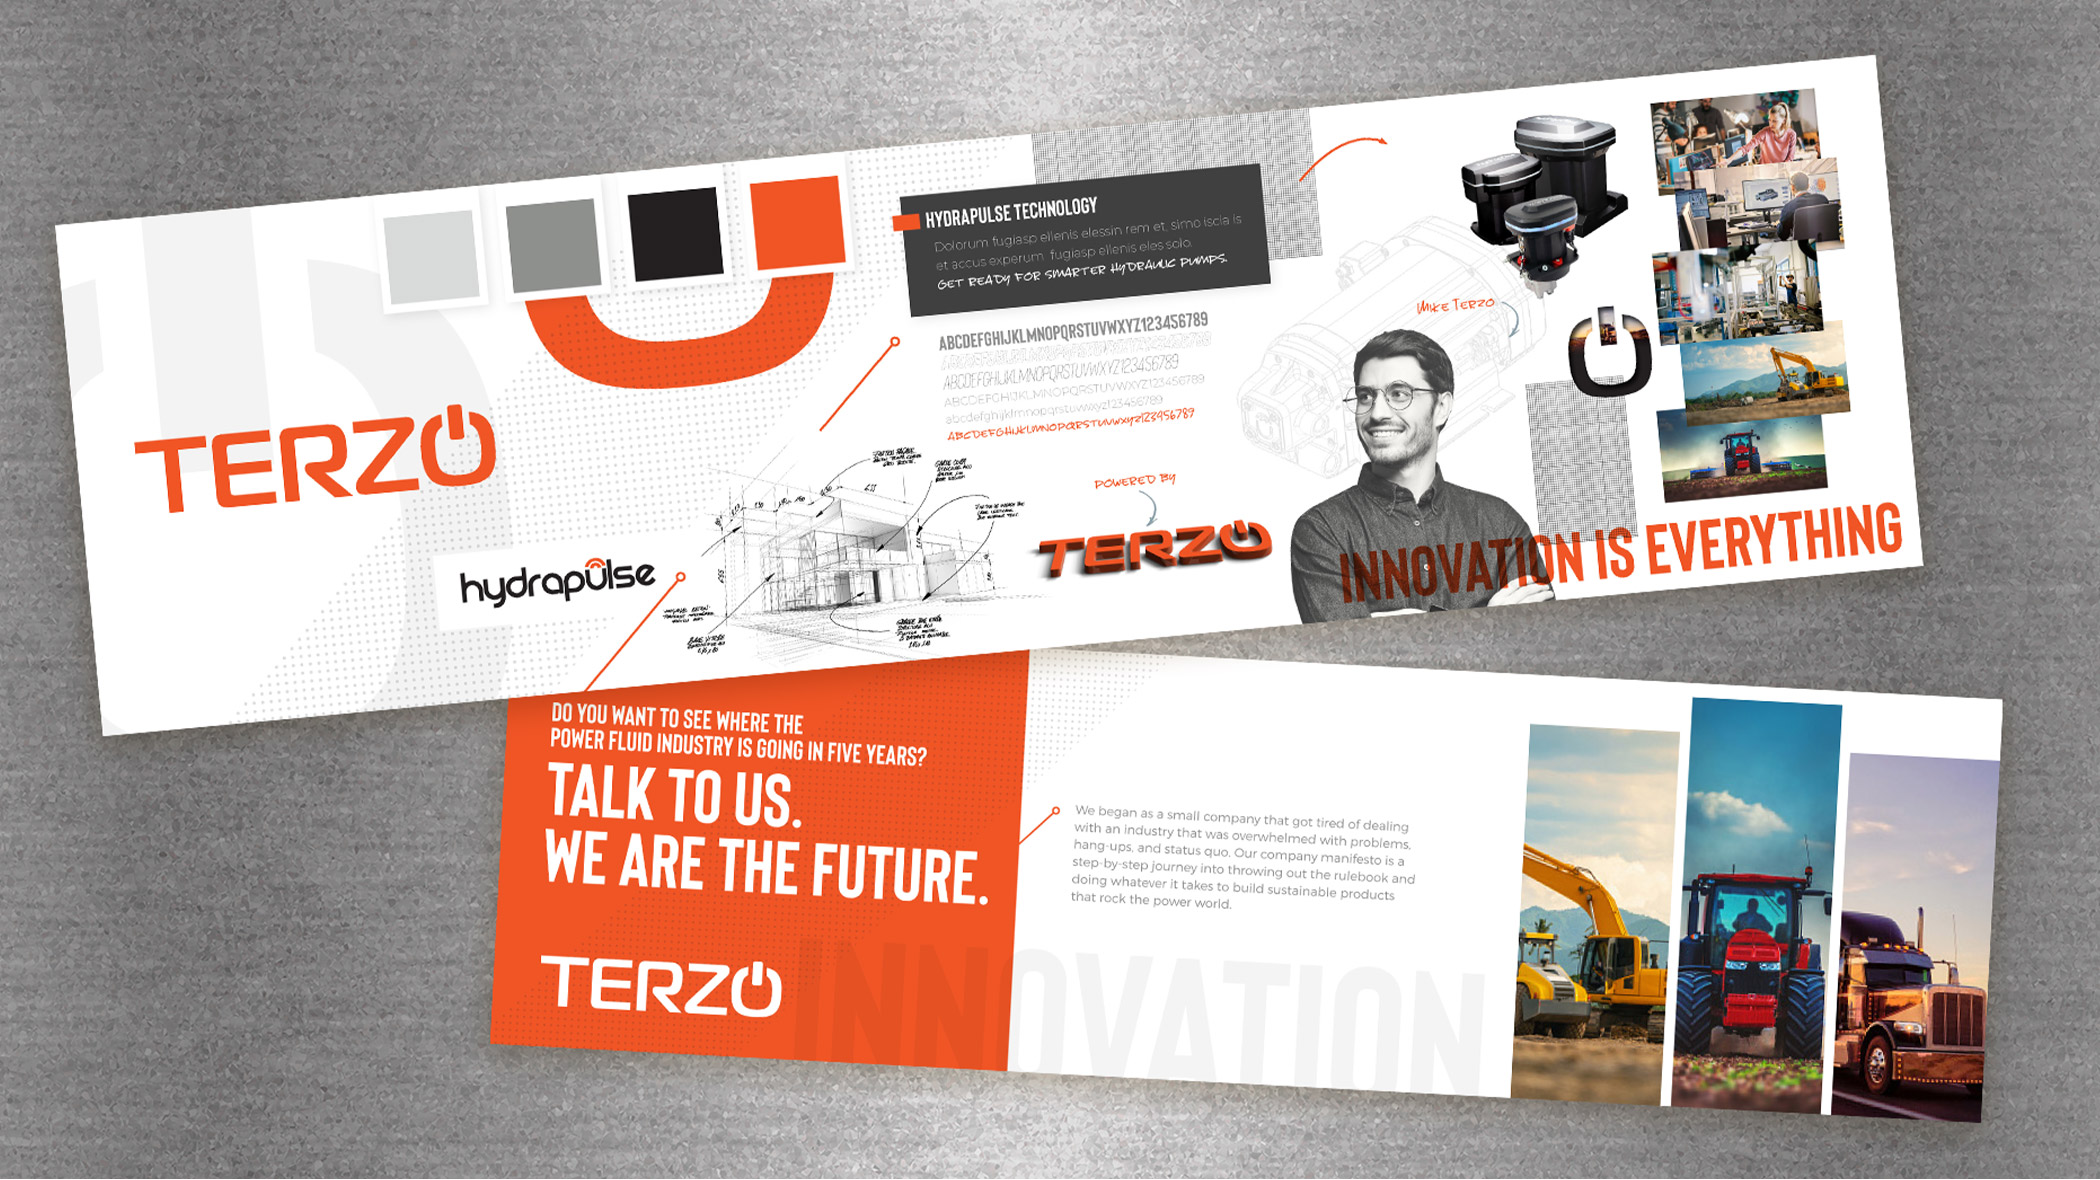 Stylescape developed by Kinetic for Terzo